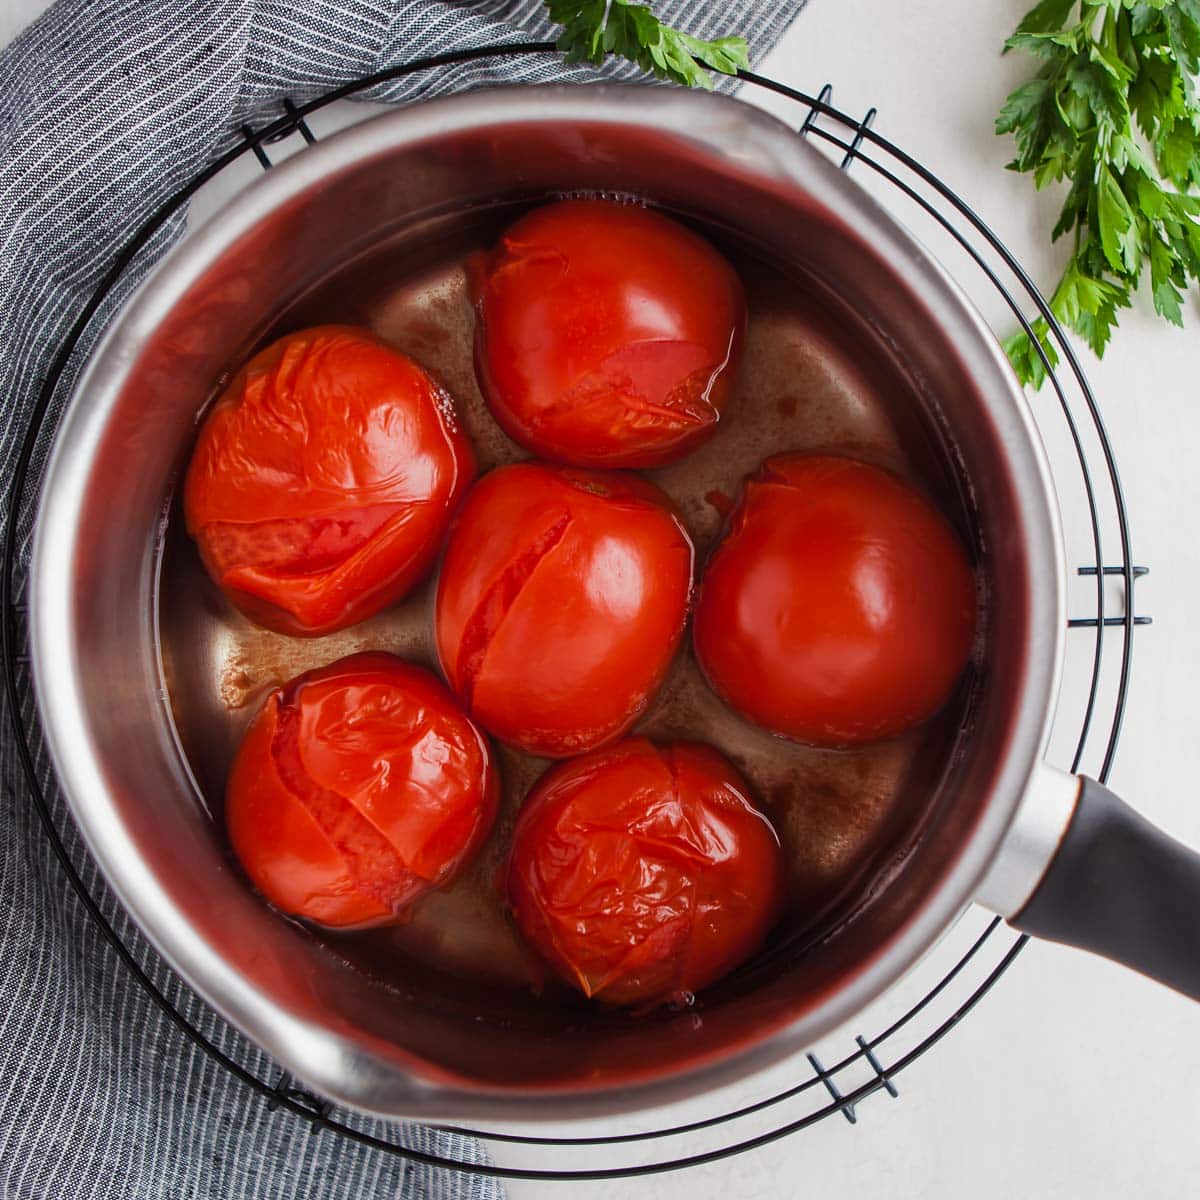 Boiled tomatoes for spicy meatballs in chipotle sauce.